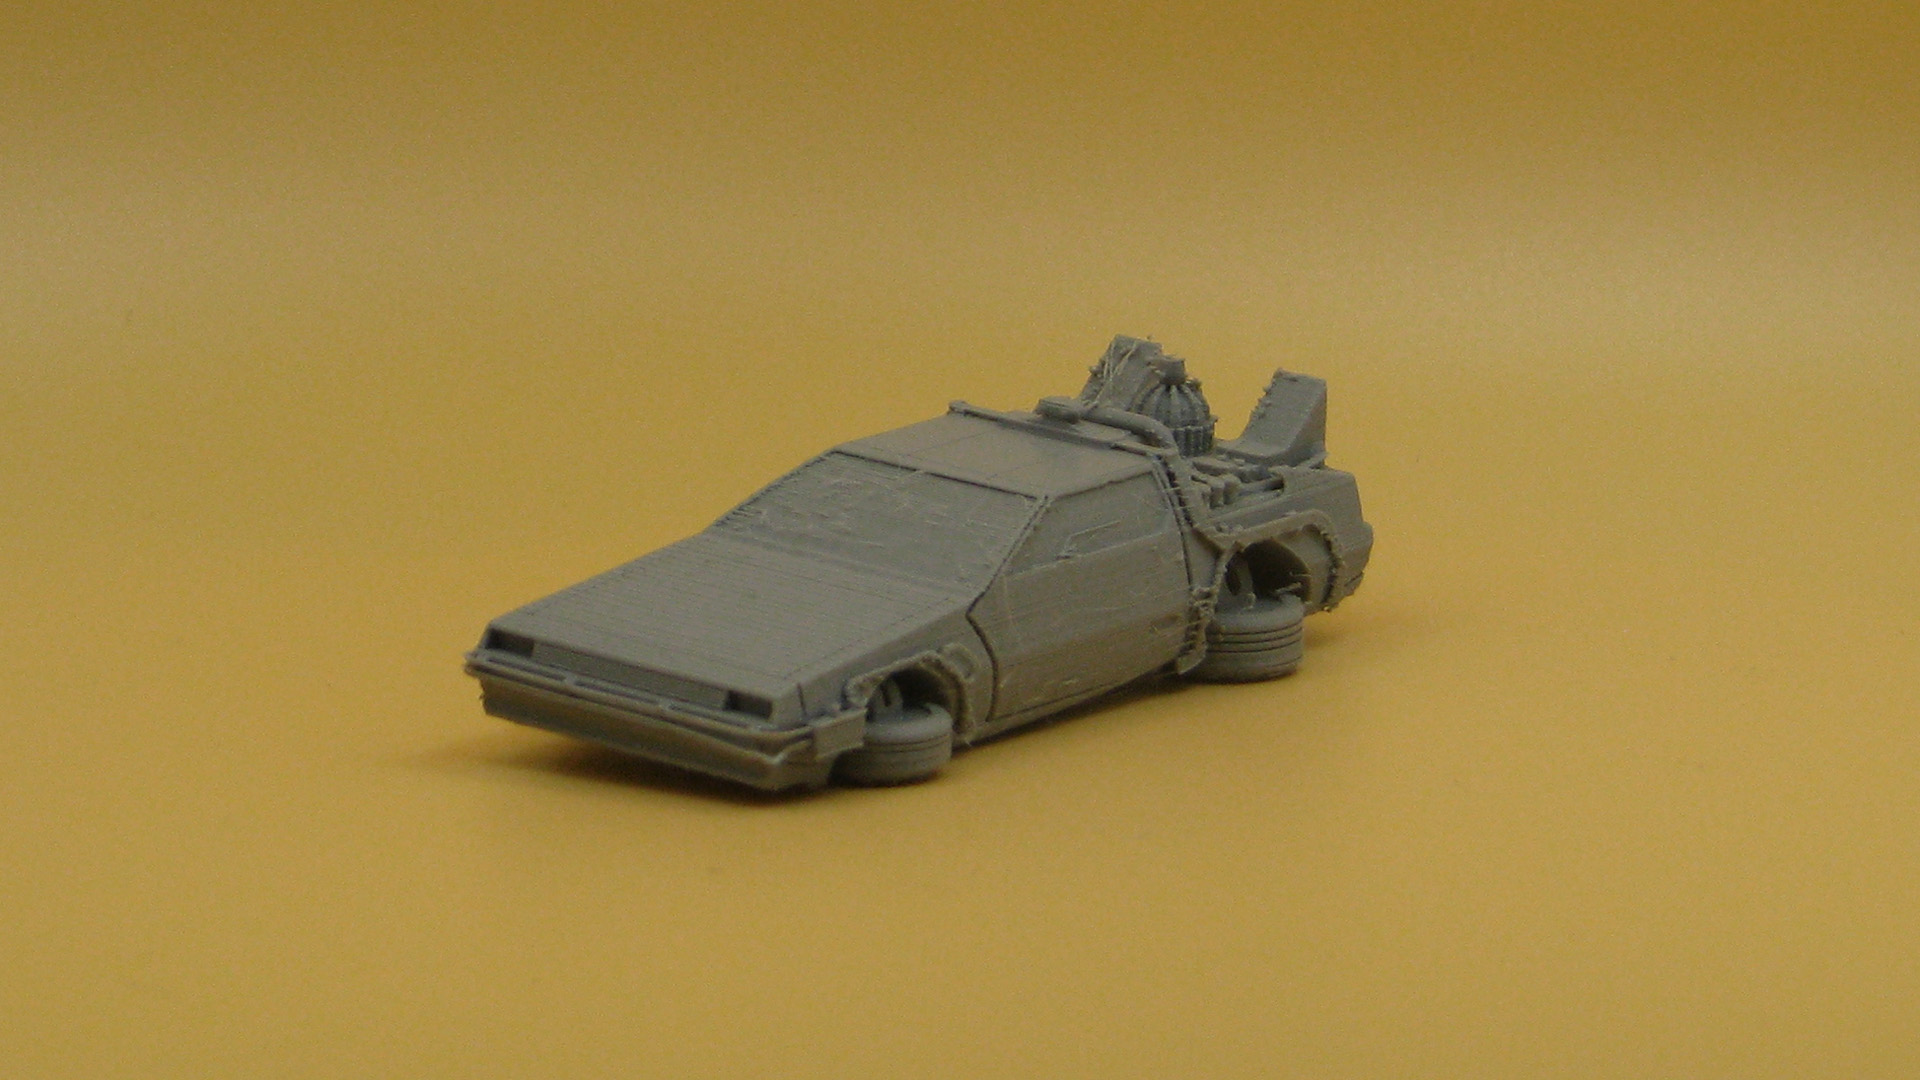 3D printed DeLorean time machine from Back to the Future